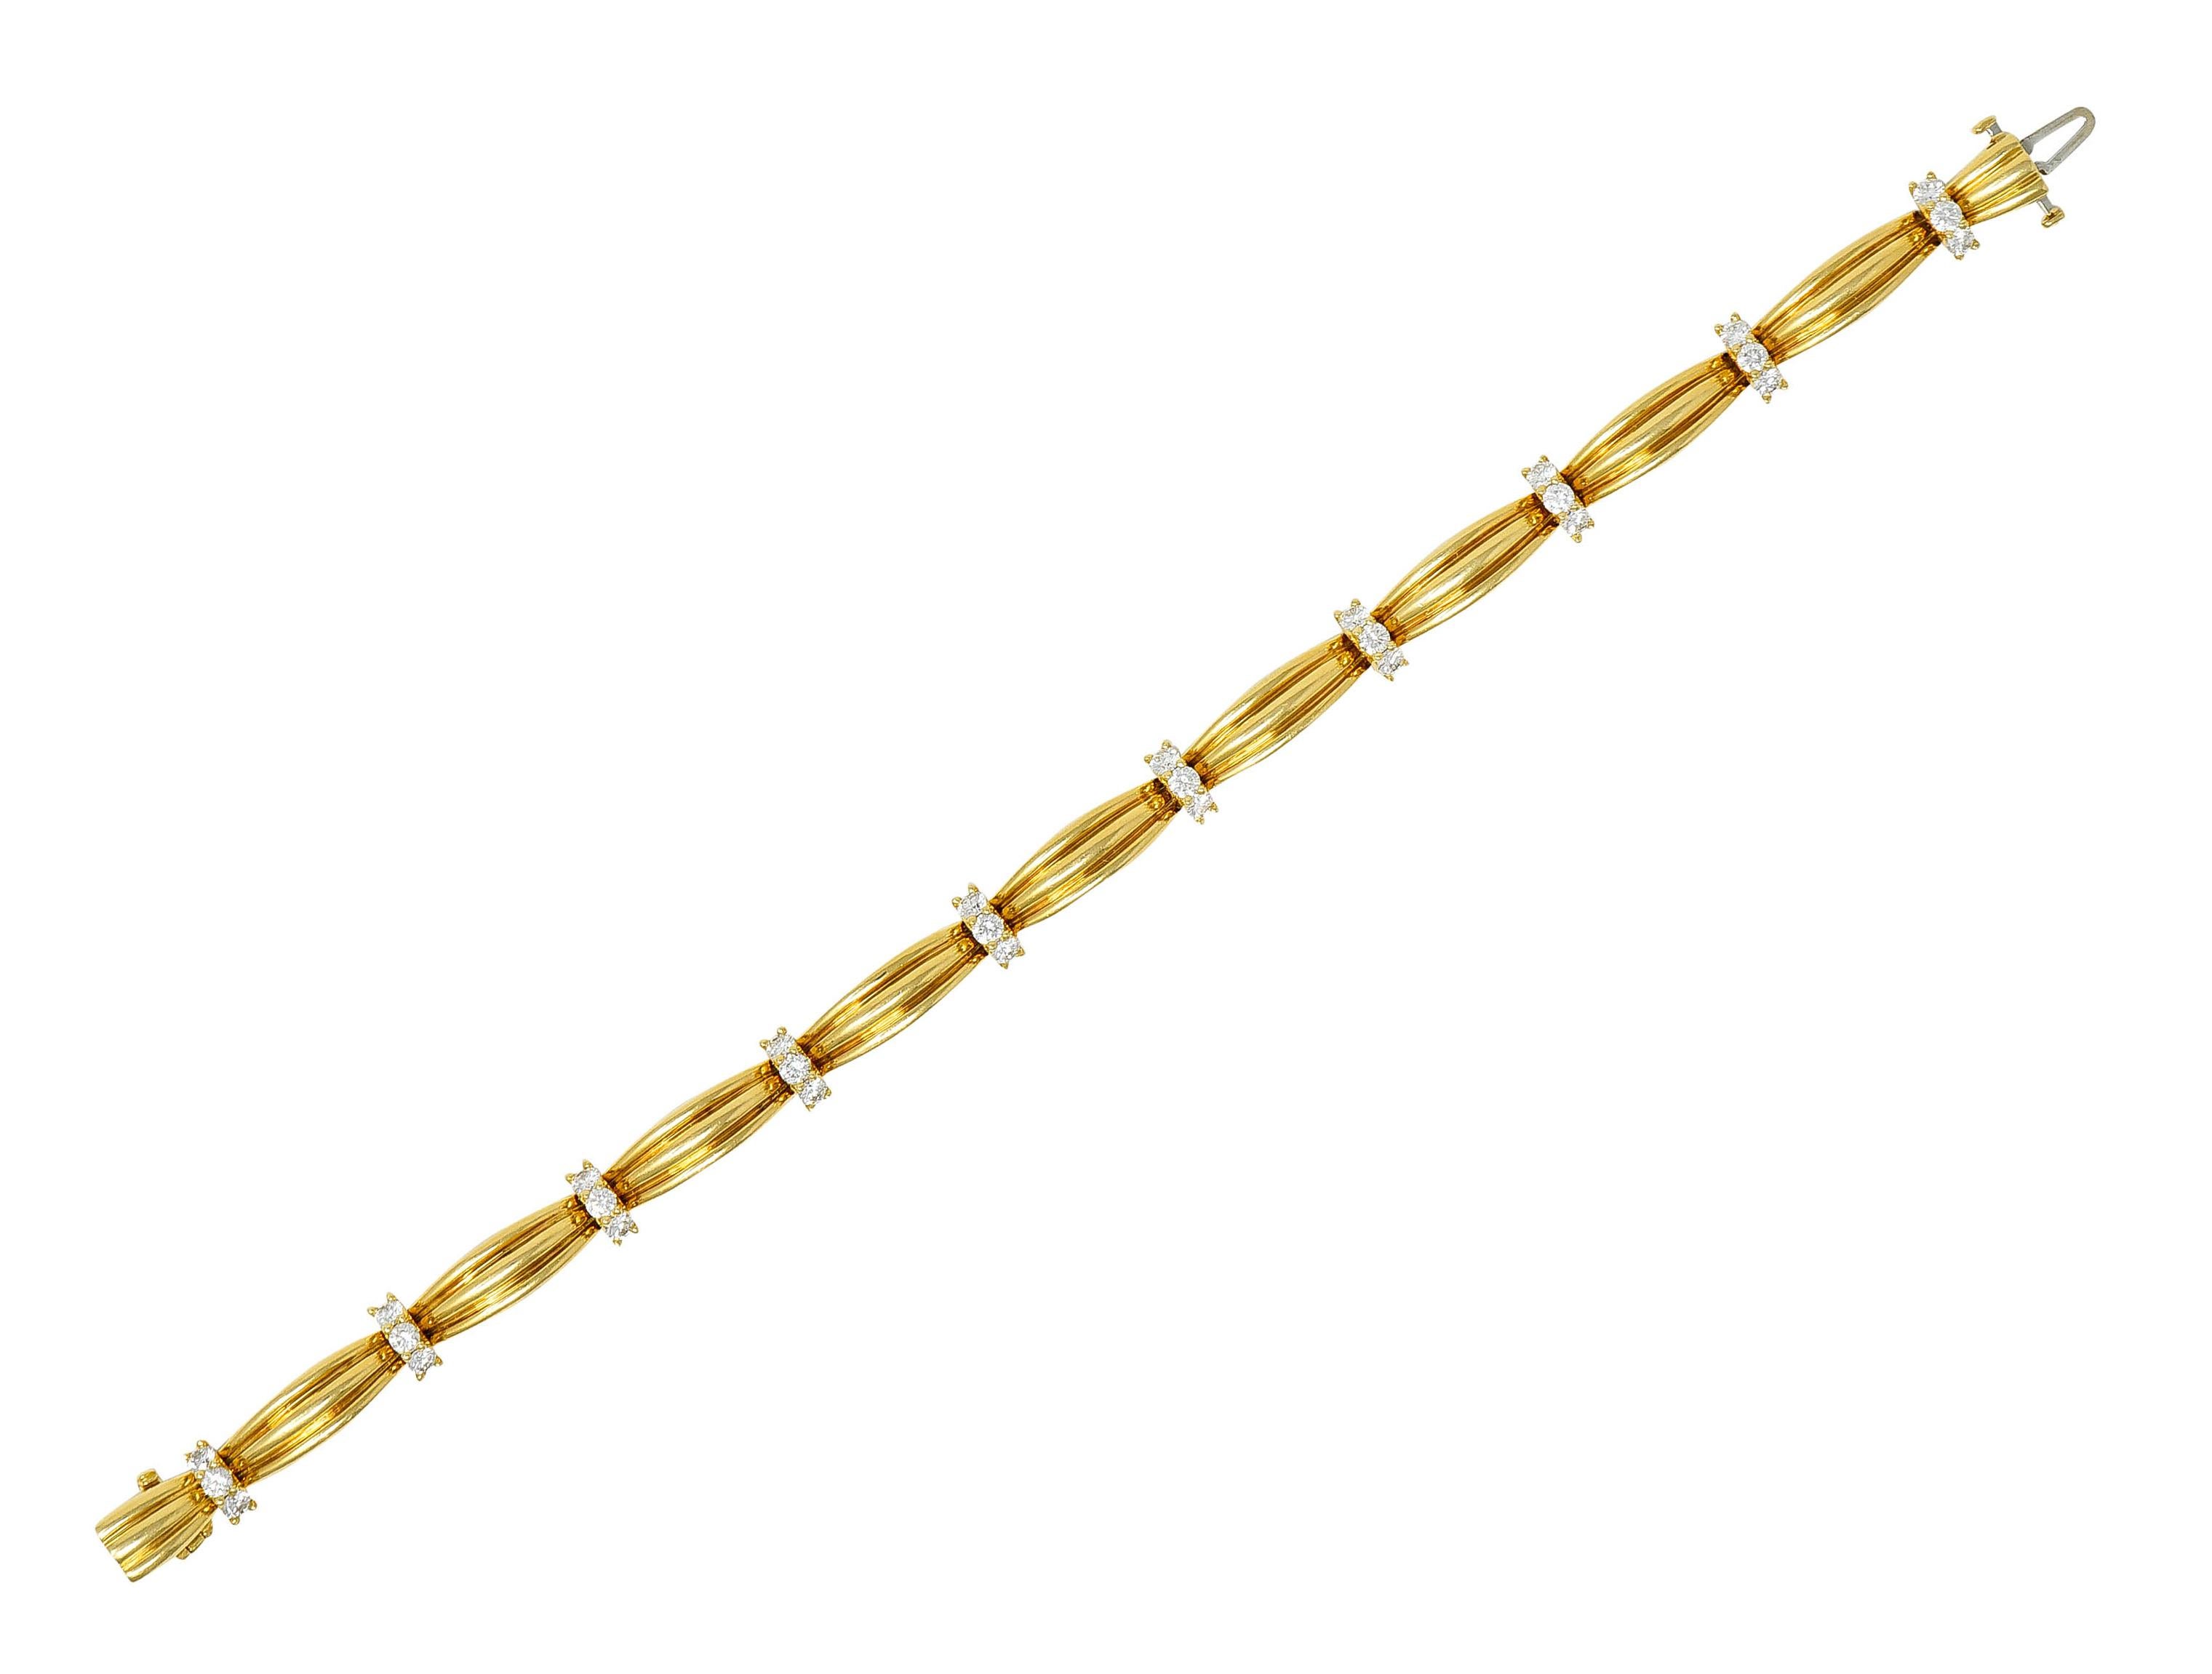 Bracelet is comprised of ribbed polished gold bar links

Alternating with diamond spacer links

Round brilliant cut diamonds weigh in total approximately 1.00 - F/G color with VS clarity

Completed by a concealed clasp with fold-over safety

Stamped